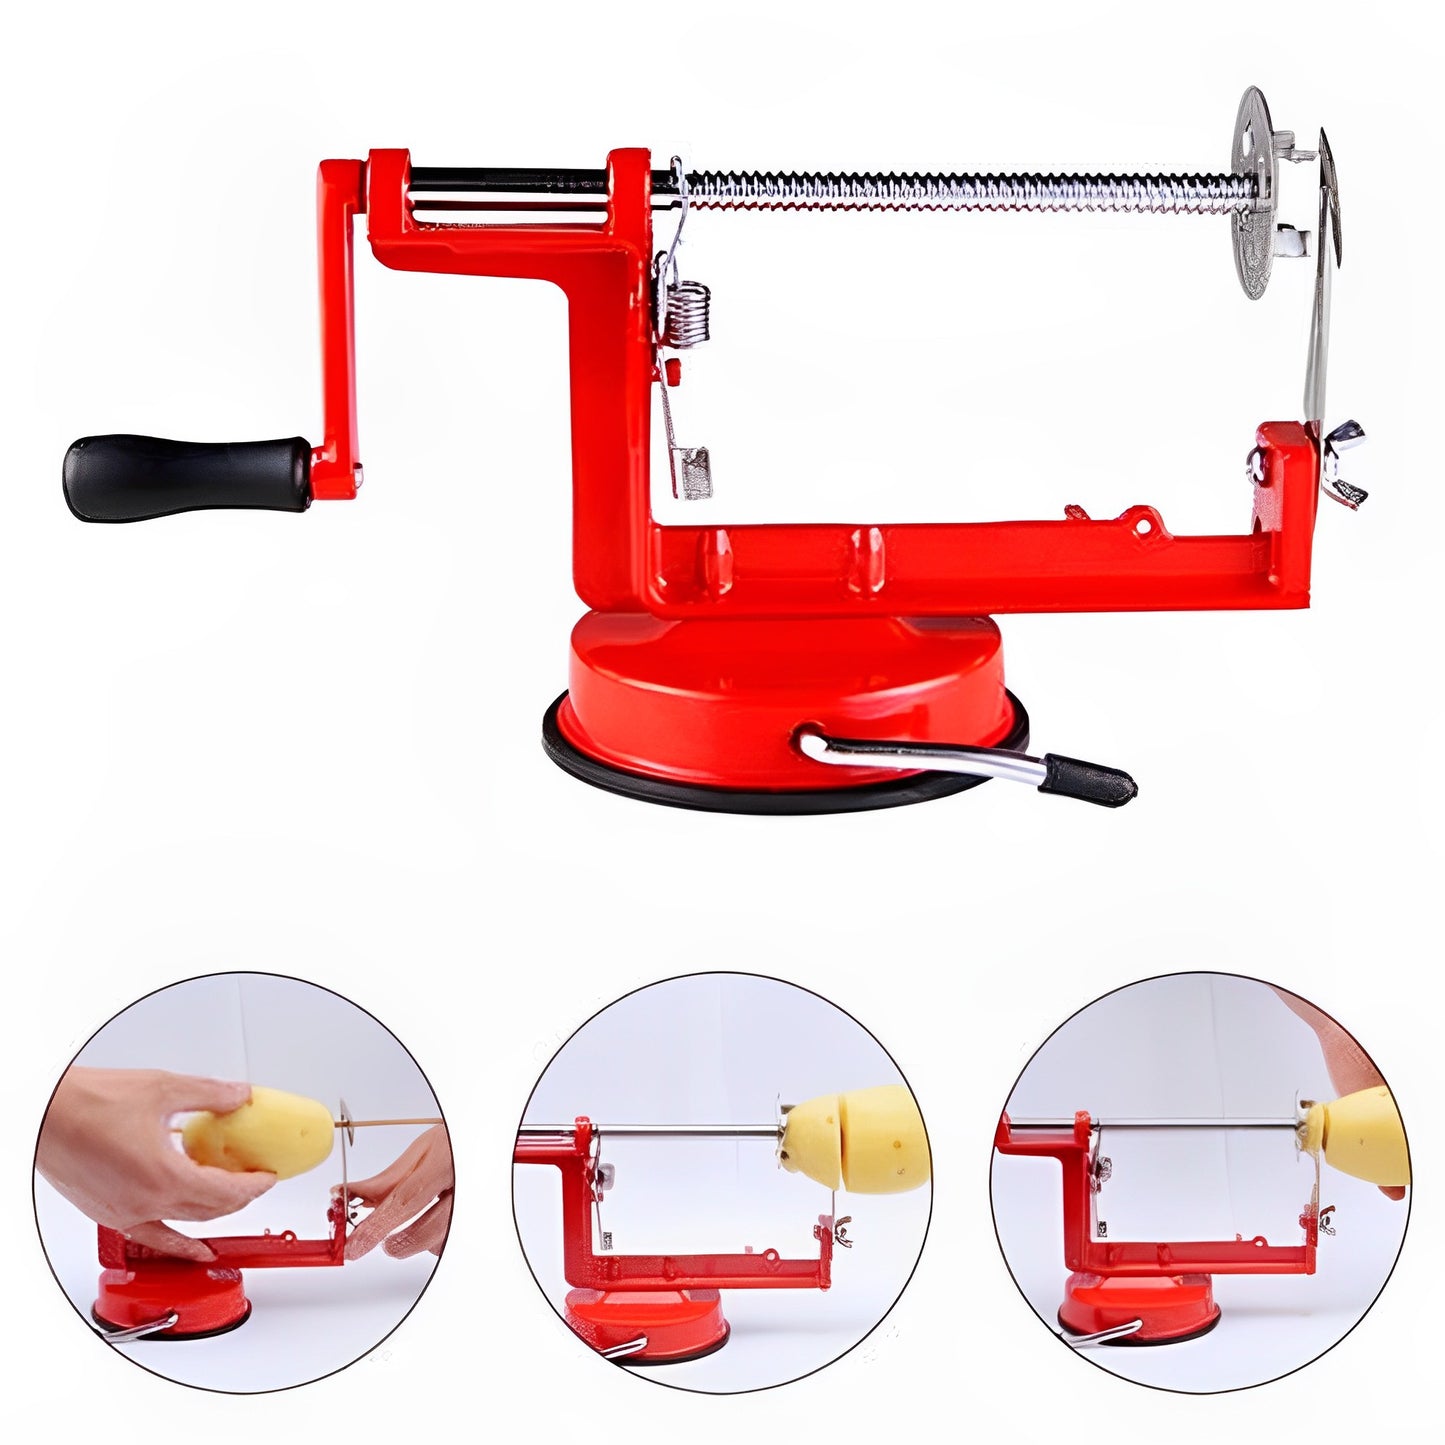 High-Quality Stainless-Steel Spiral Potato Slicer With Non-Slip Rubber Feet